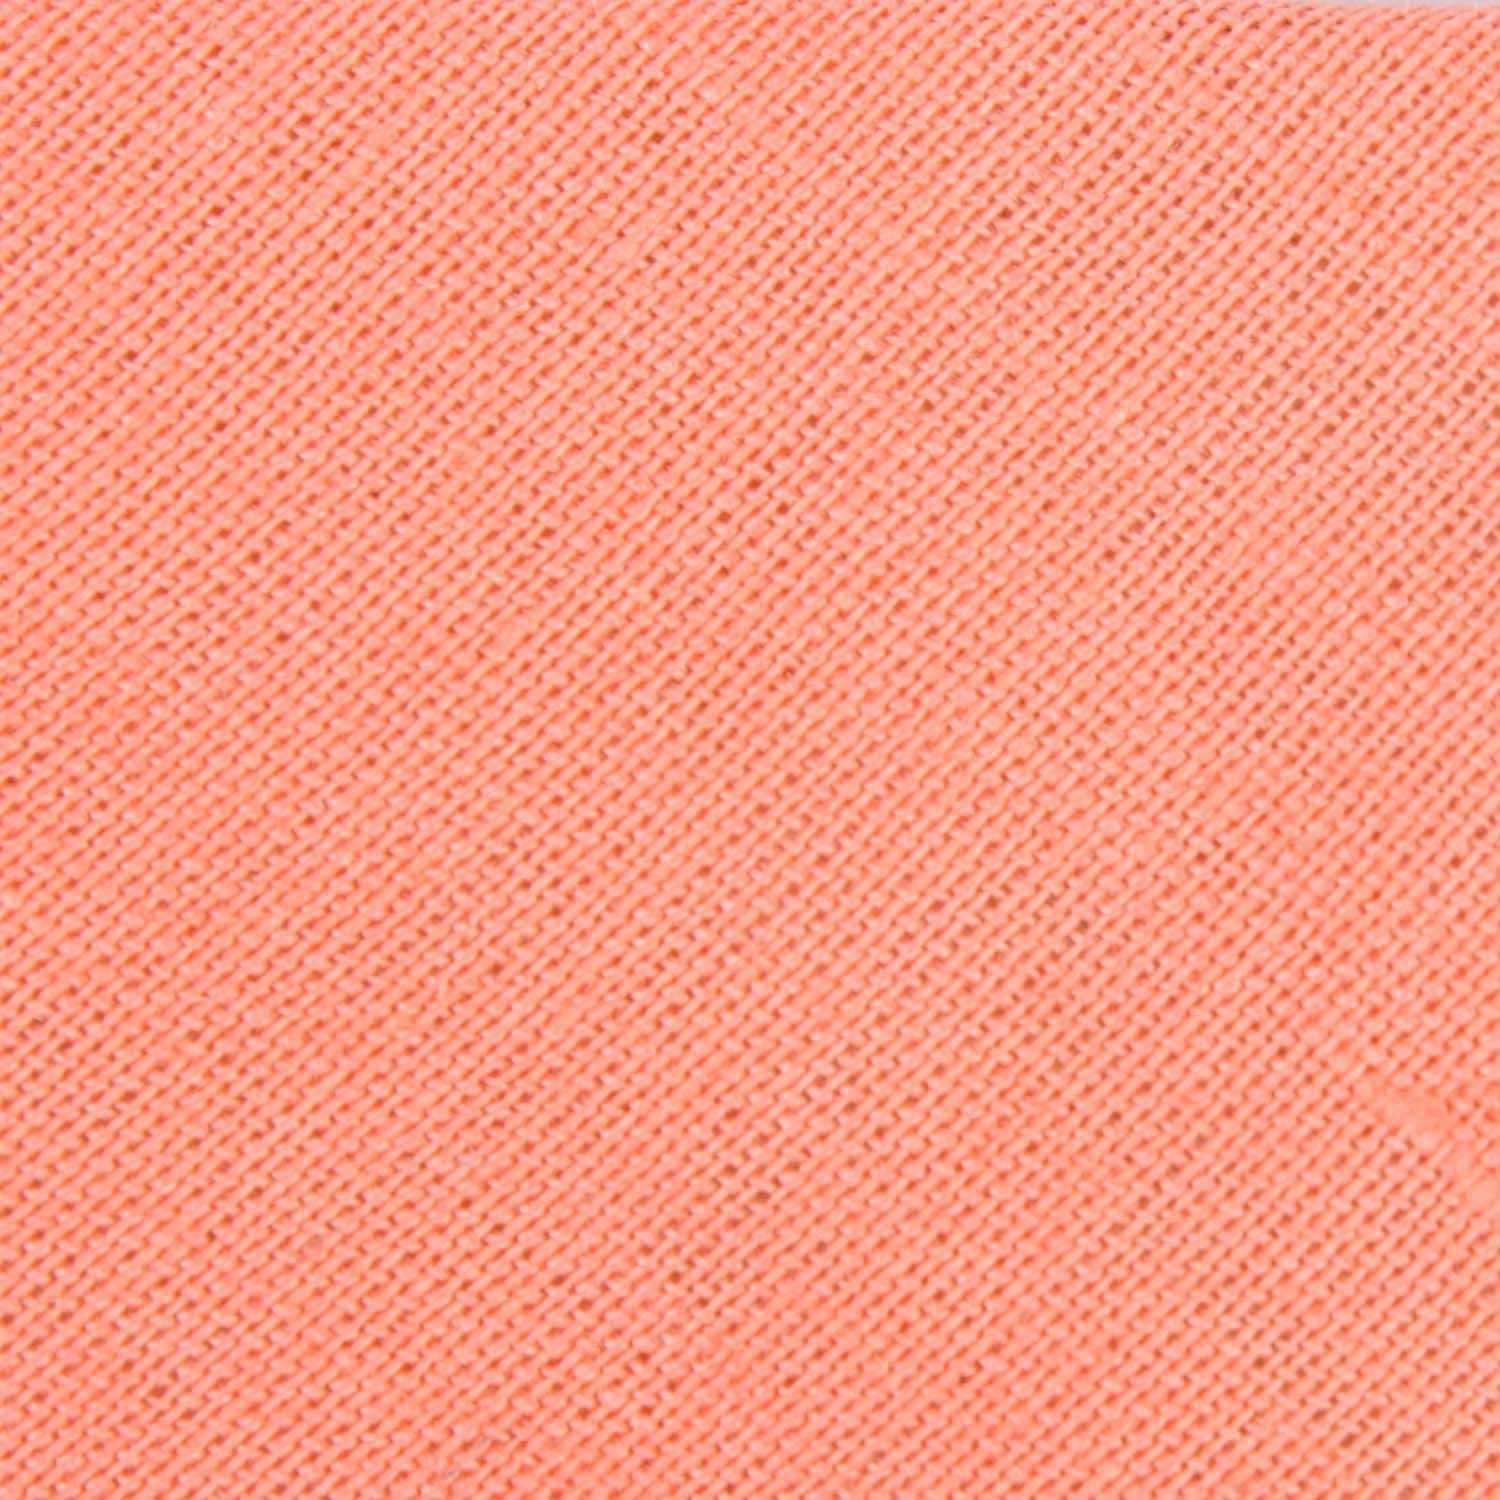 Coral Pink Linen Fabric Pocket Square L170